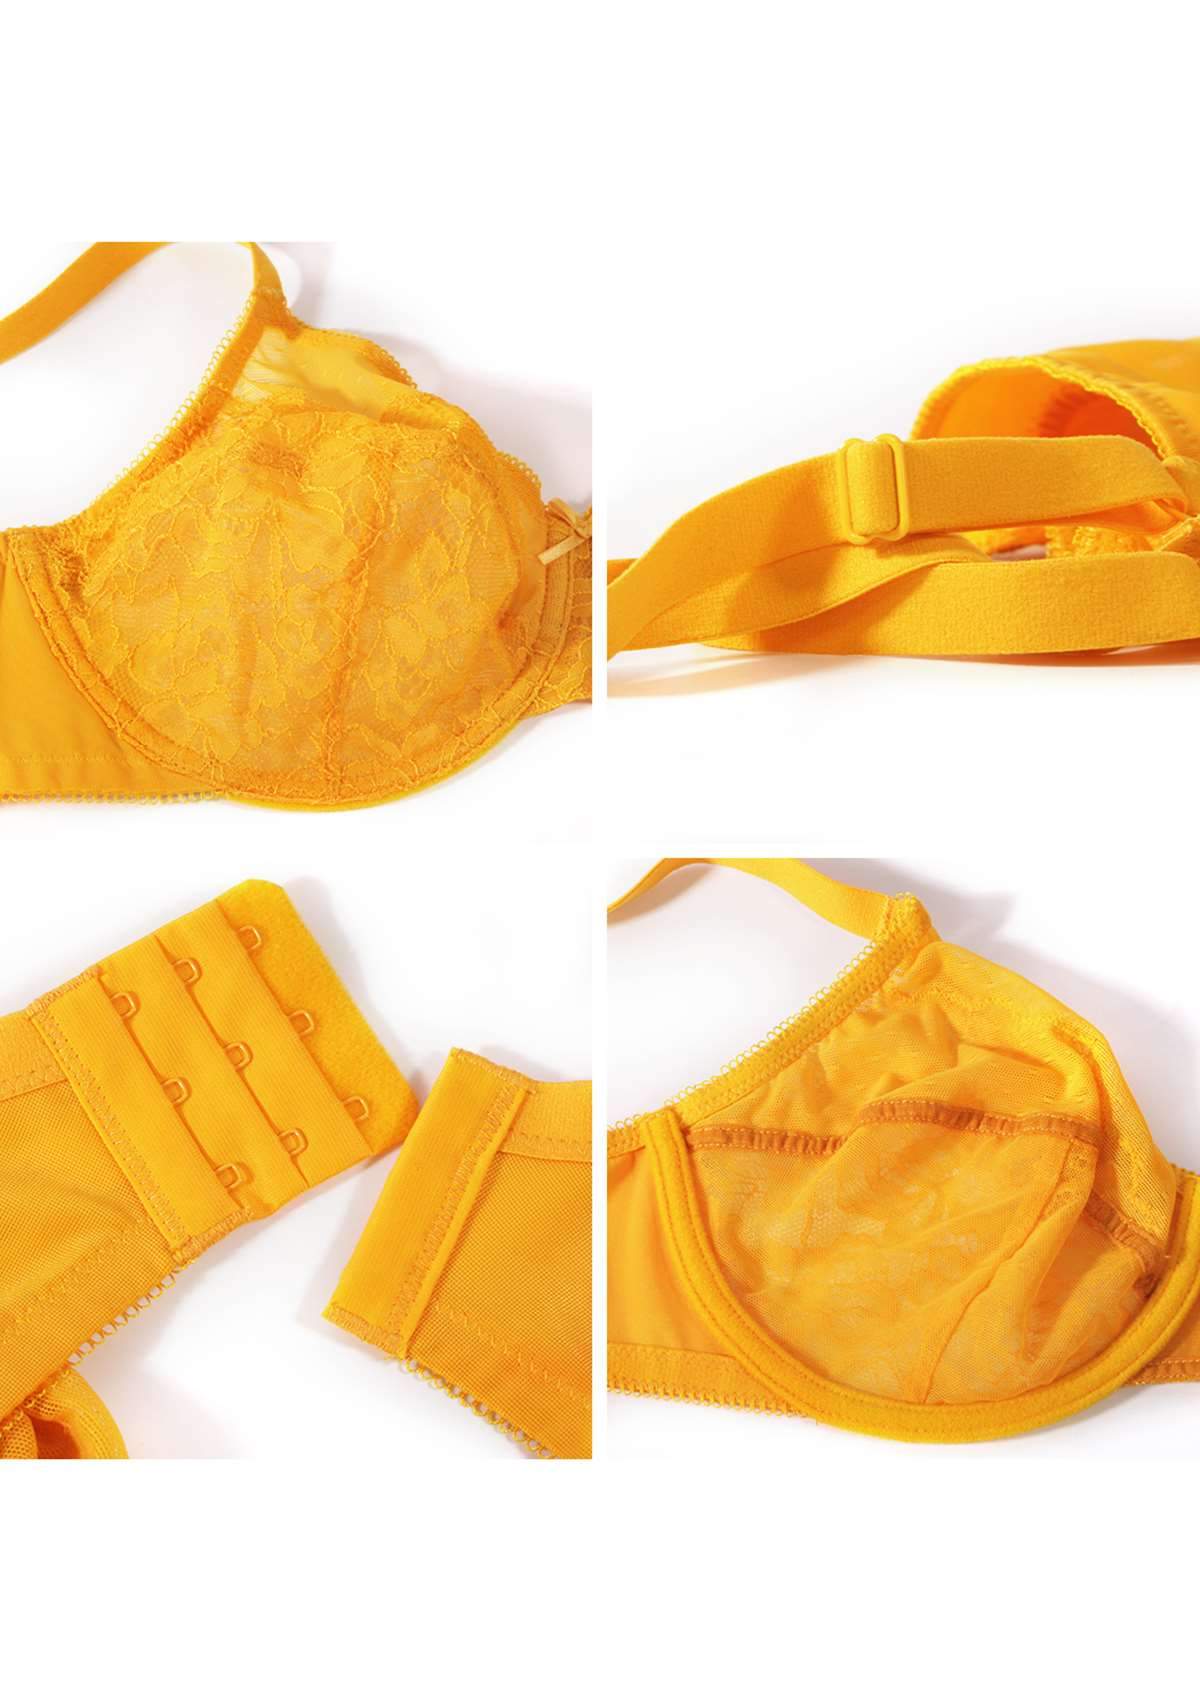 HSIA Enchante Bra And Panty Sets: Unpadded Bra With Back Support - Cadmium Yellow / 36 / DD/E